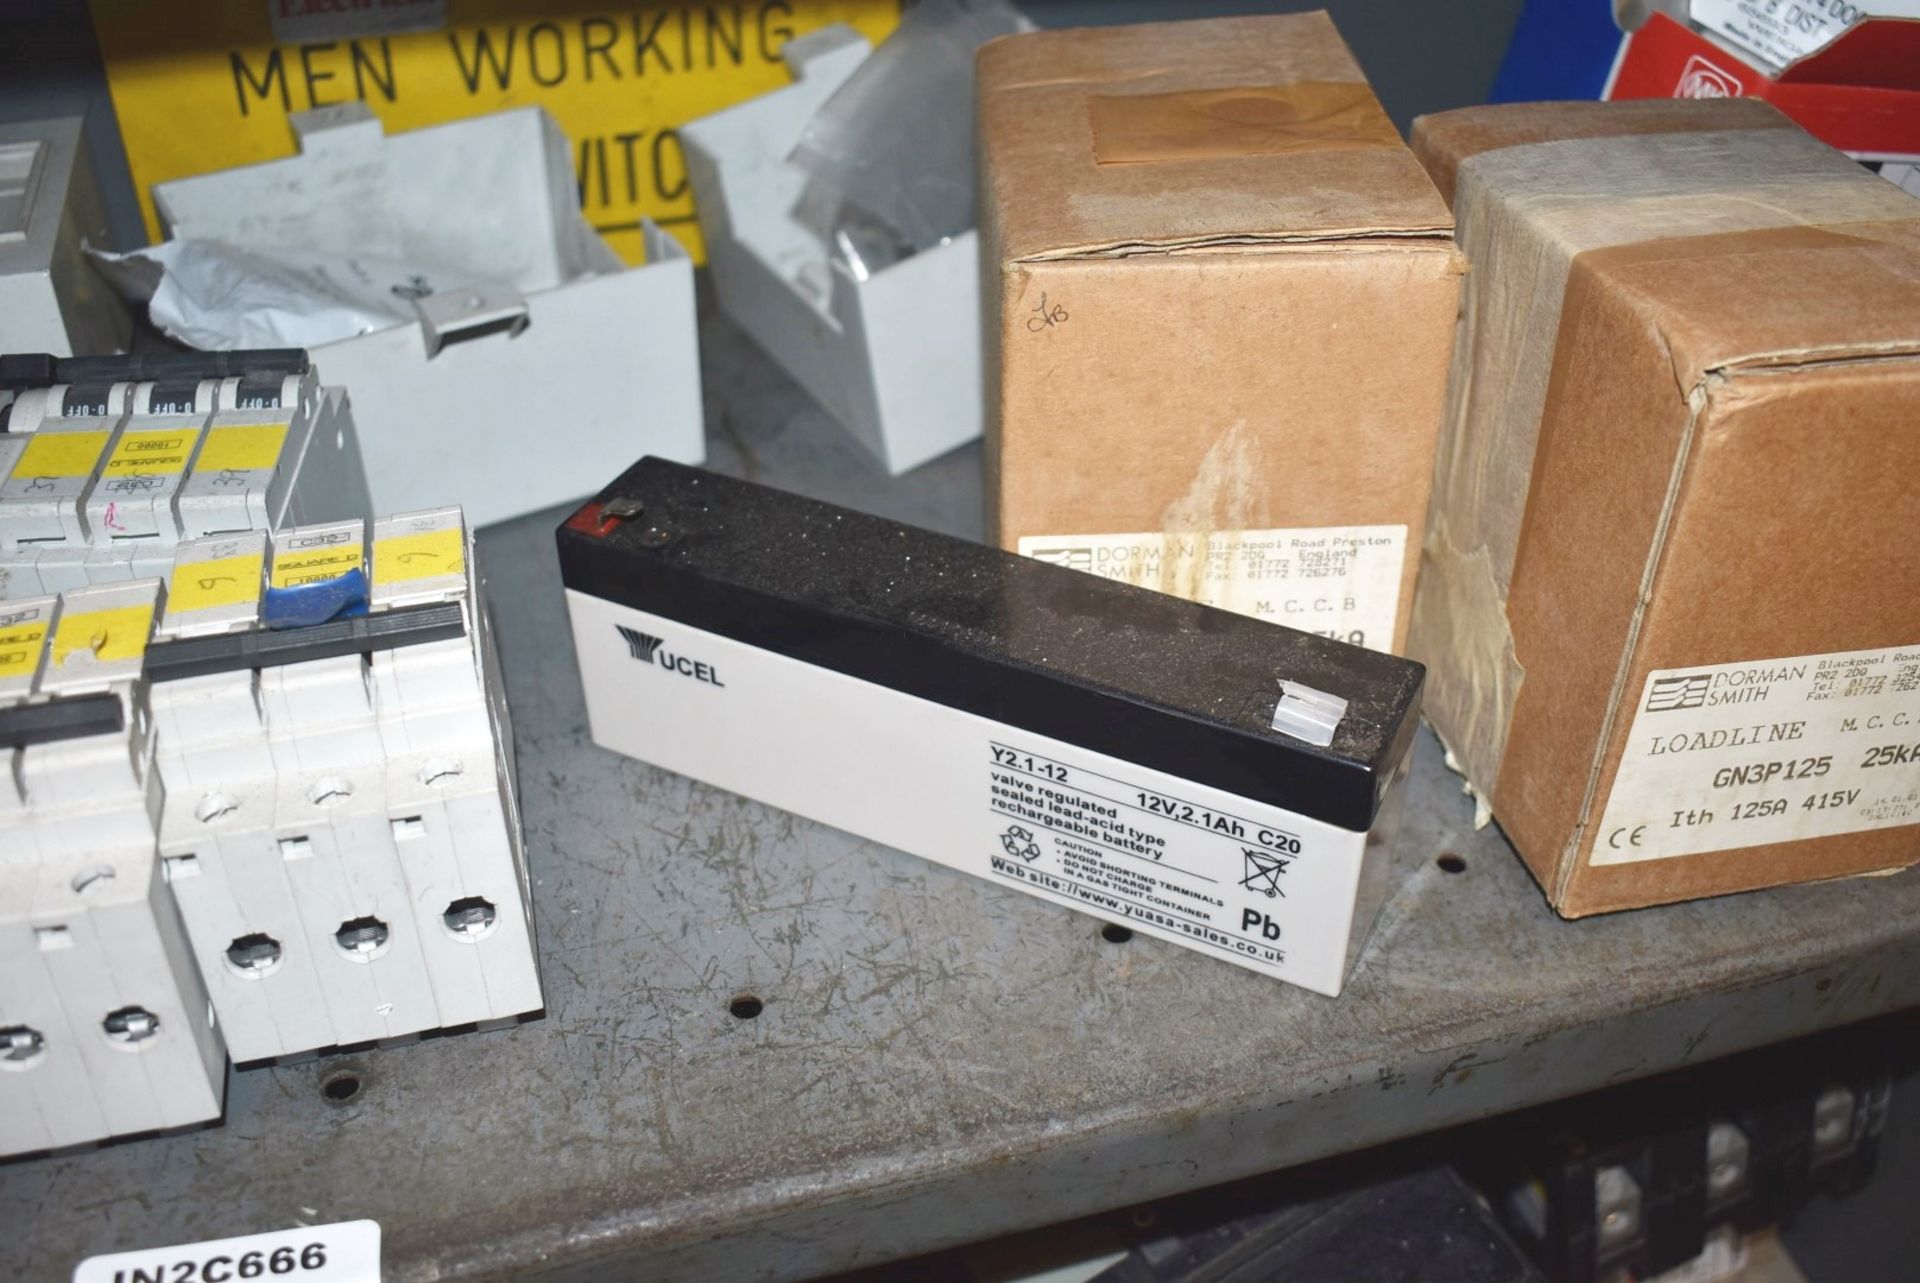 Assorted Electrical Components - Mainly Circuit Breakers - Contents of Shelf - Ref: C666 - CL816 - L - Image 8 of 12